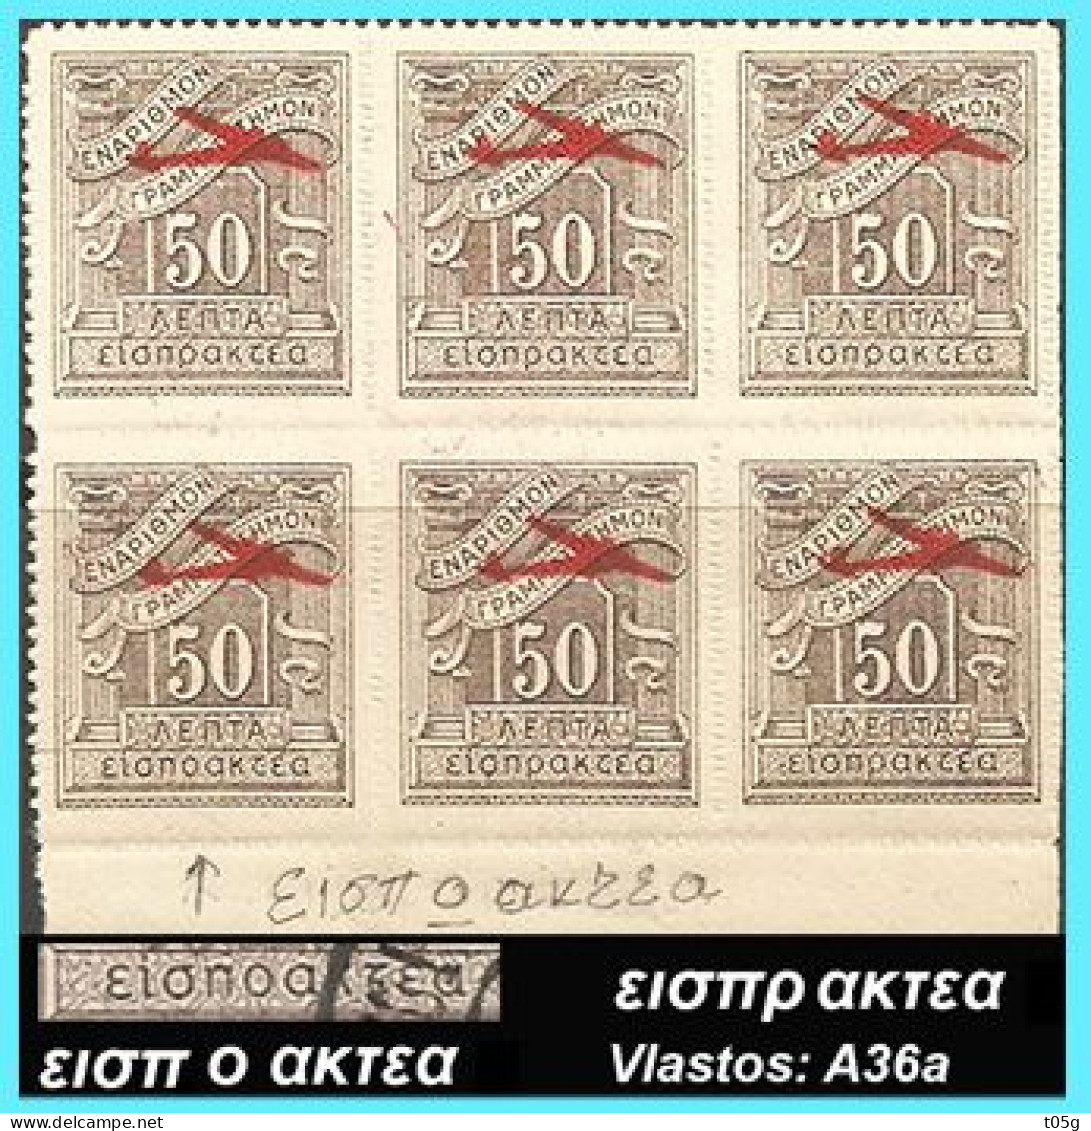 GREECE-GRECE-HELLAS 1938: / εισπ ο ακτεα Airpianes Overprint  Blocl/6 From Set  MNH** - Unused Stamps